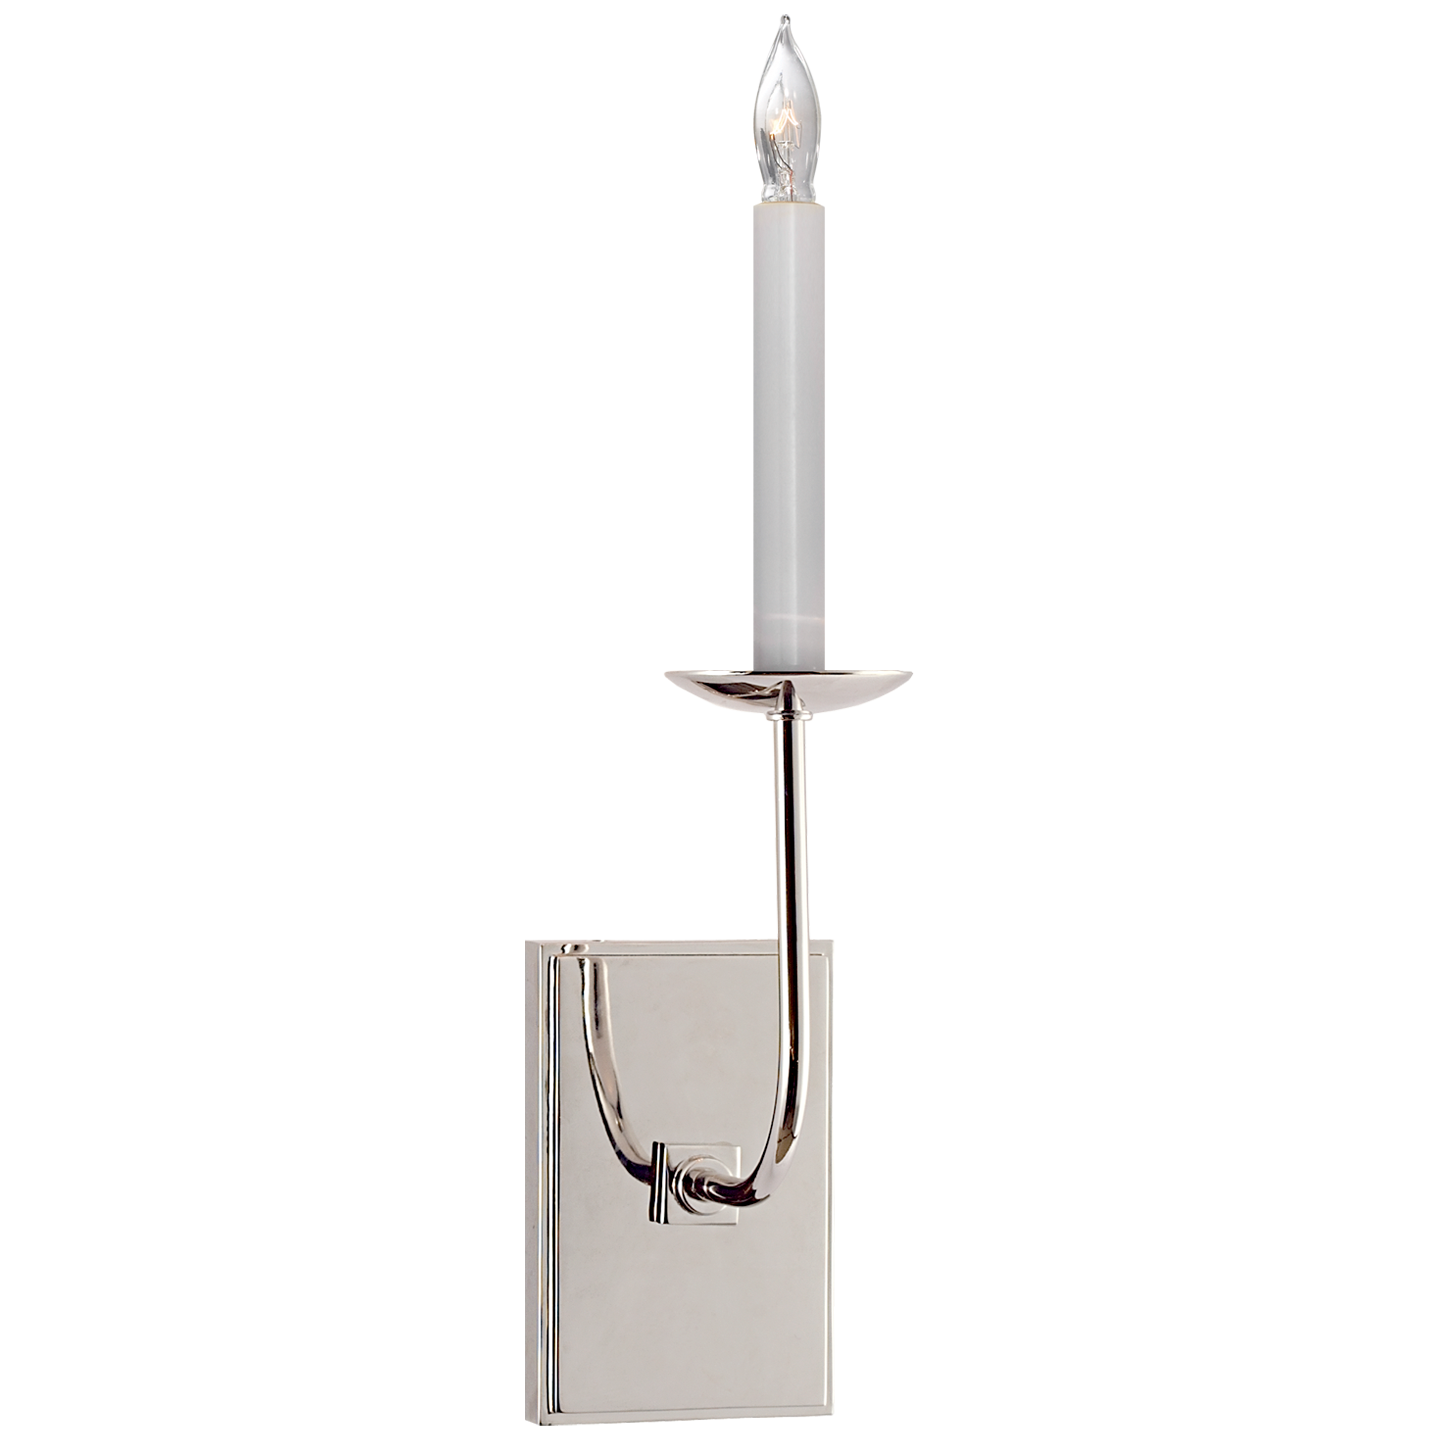 The TT Single Sconce by Visual Comfort is sleek and timeless, bringing a gorgeous source of light to any bathroom, hallway, or other area needing extra light  Designer: E. F. Chapman